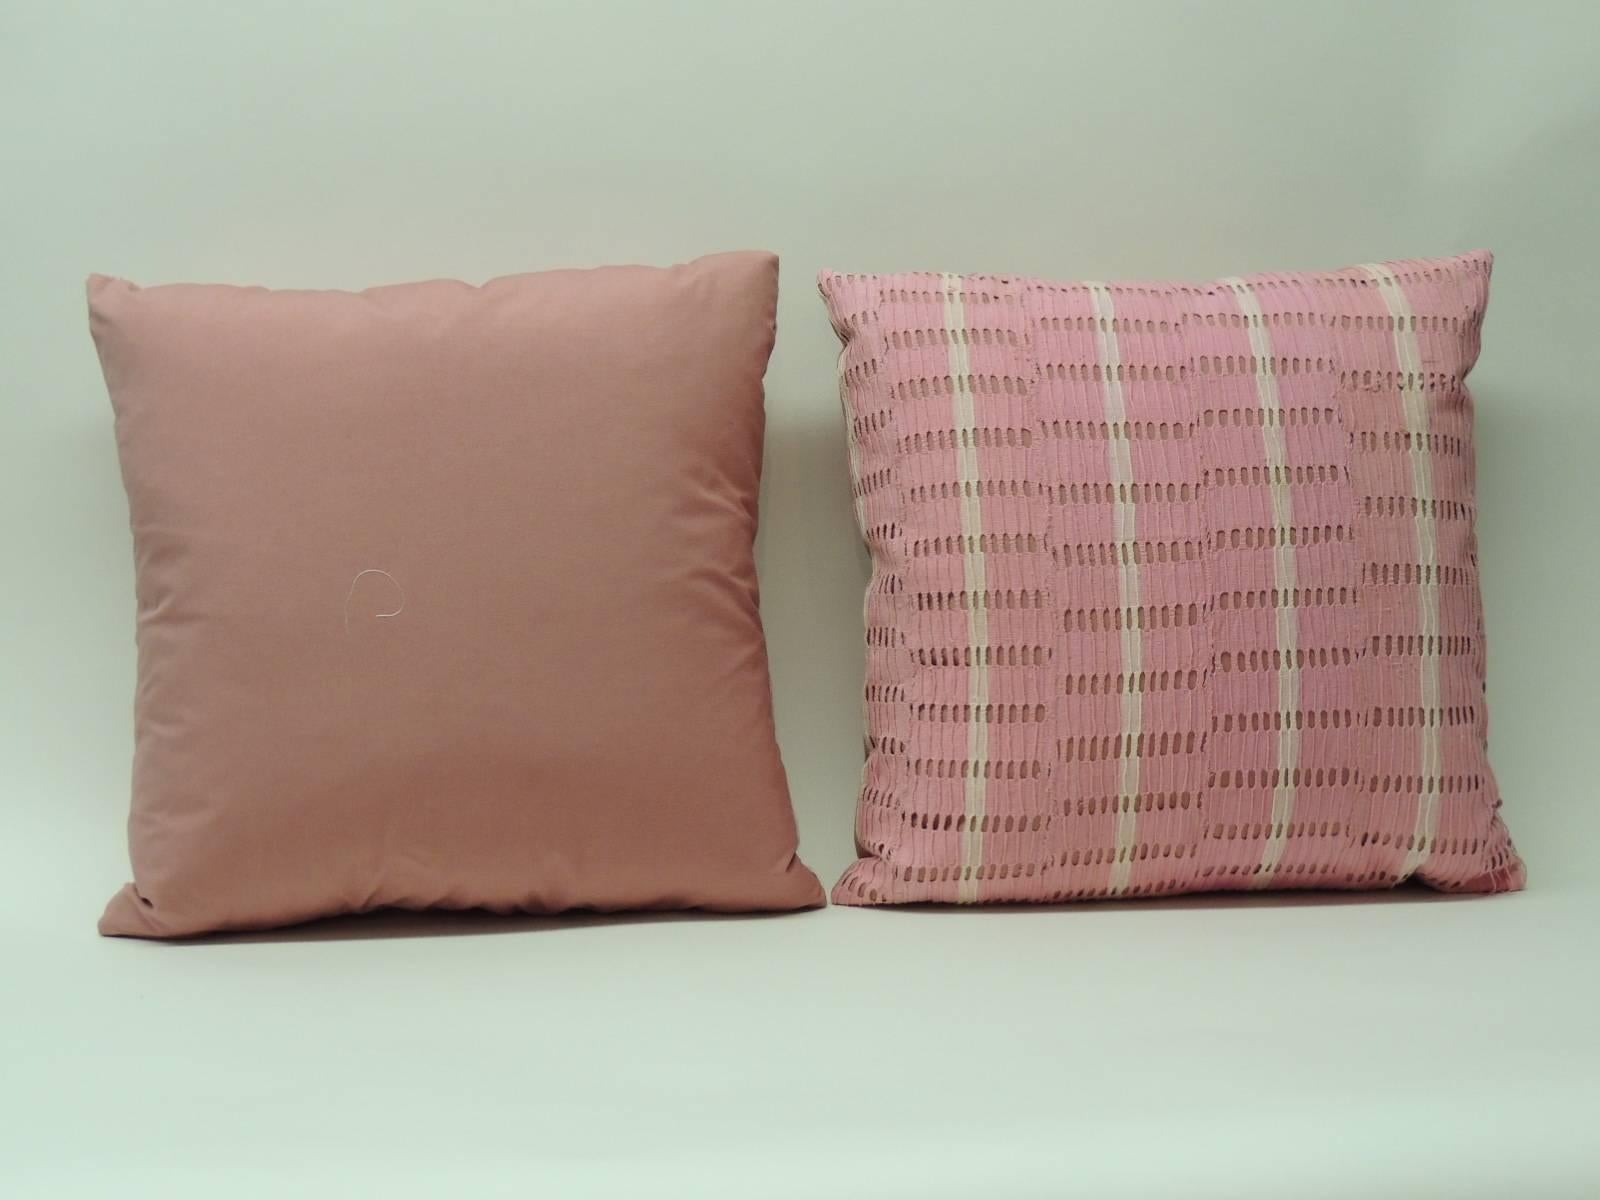 Vintage Pair of Yoruba Lace Weave Hot Pink African Bolster Decorative Pillows
Eyelet design creates a stripe pattern. 
Handcrafted and designed in the USA.
handstitched (no zipper.) Custom made pillow inserts. Pink cotton underlining and backing.